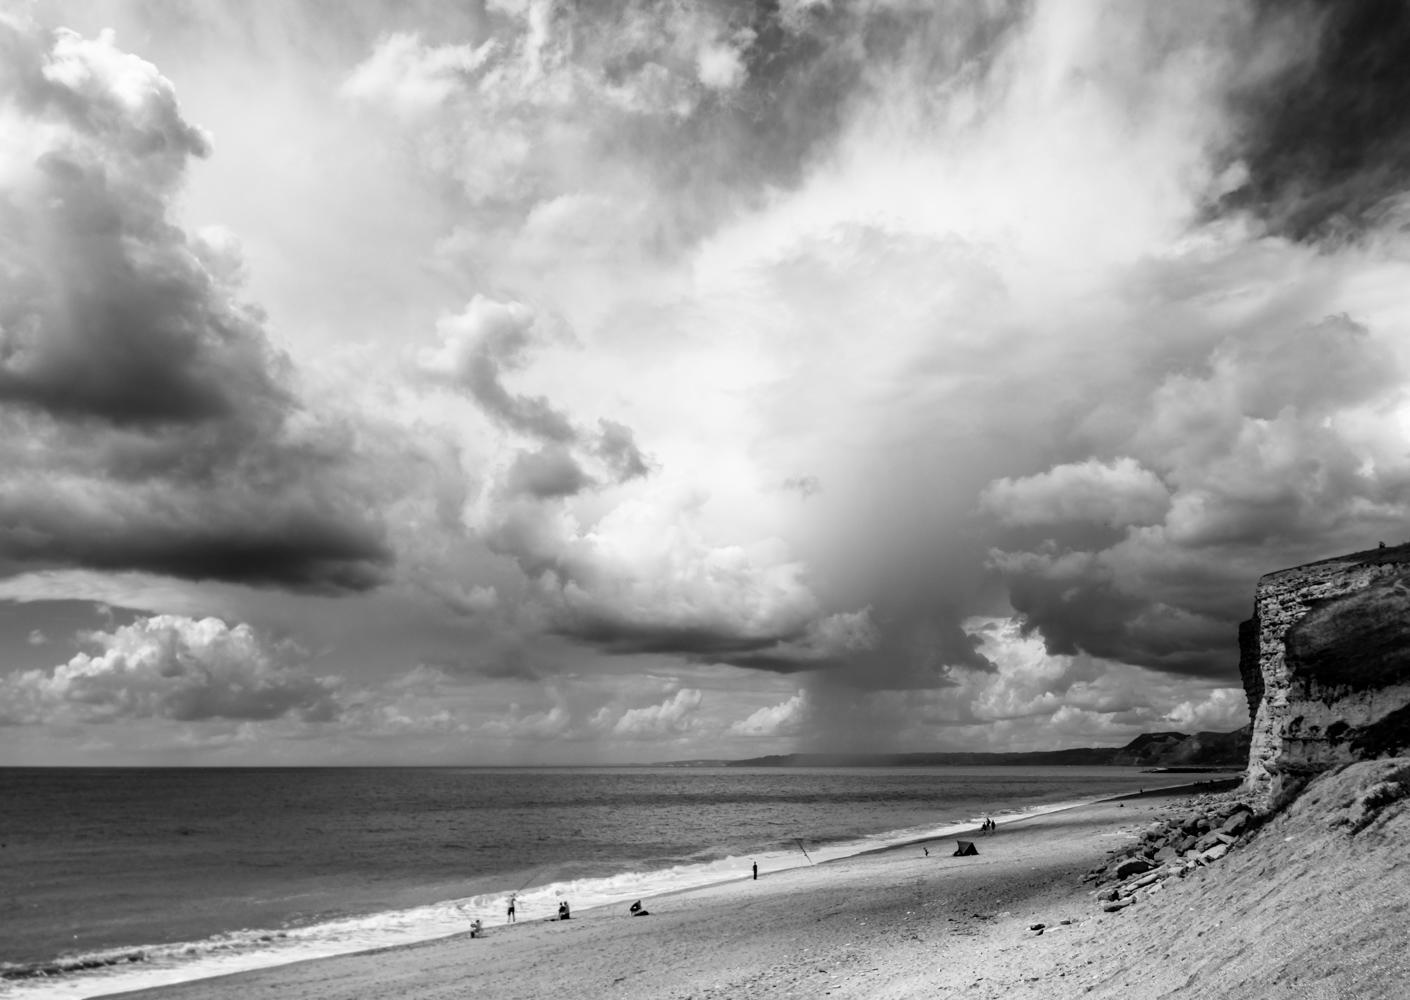 An image called Cloudburst from the Dorset Coast, a black and white coastal classic